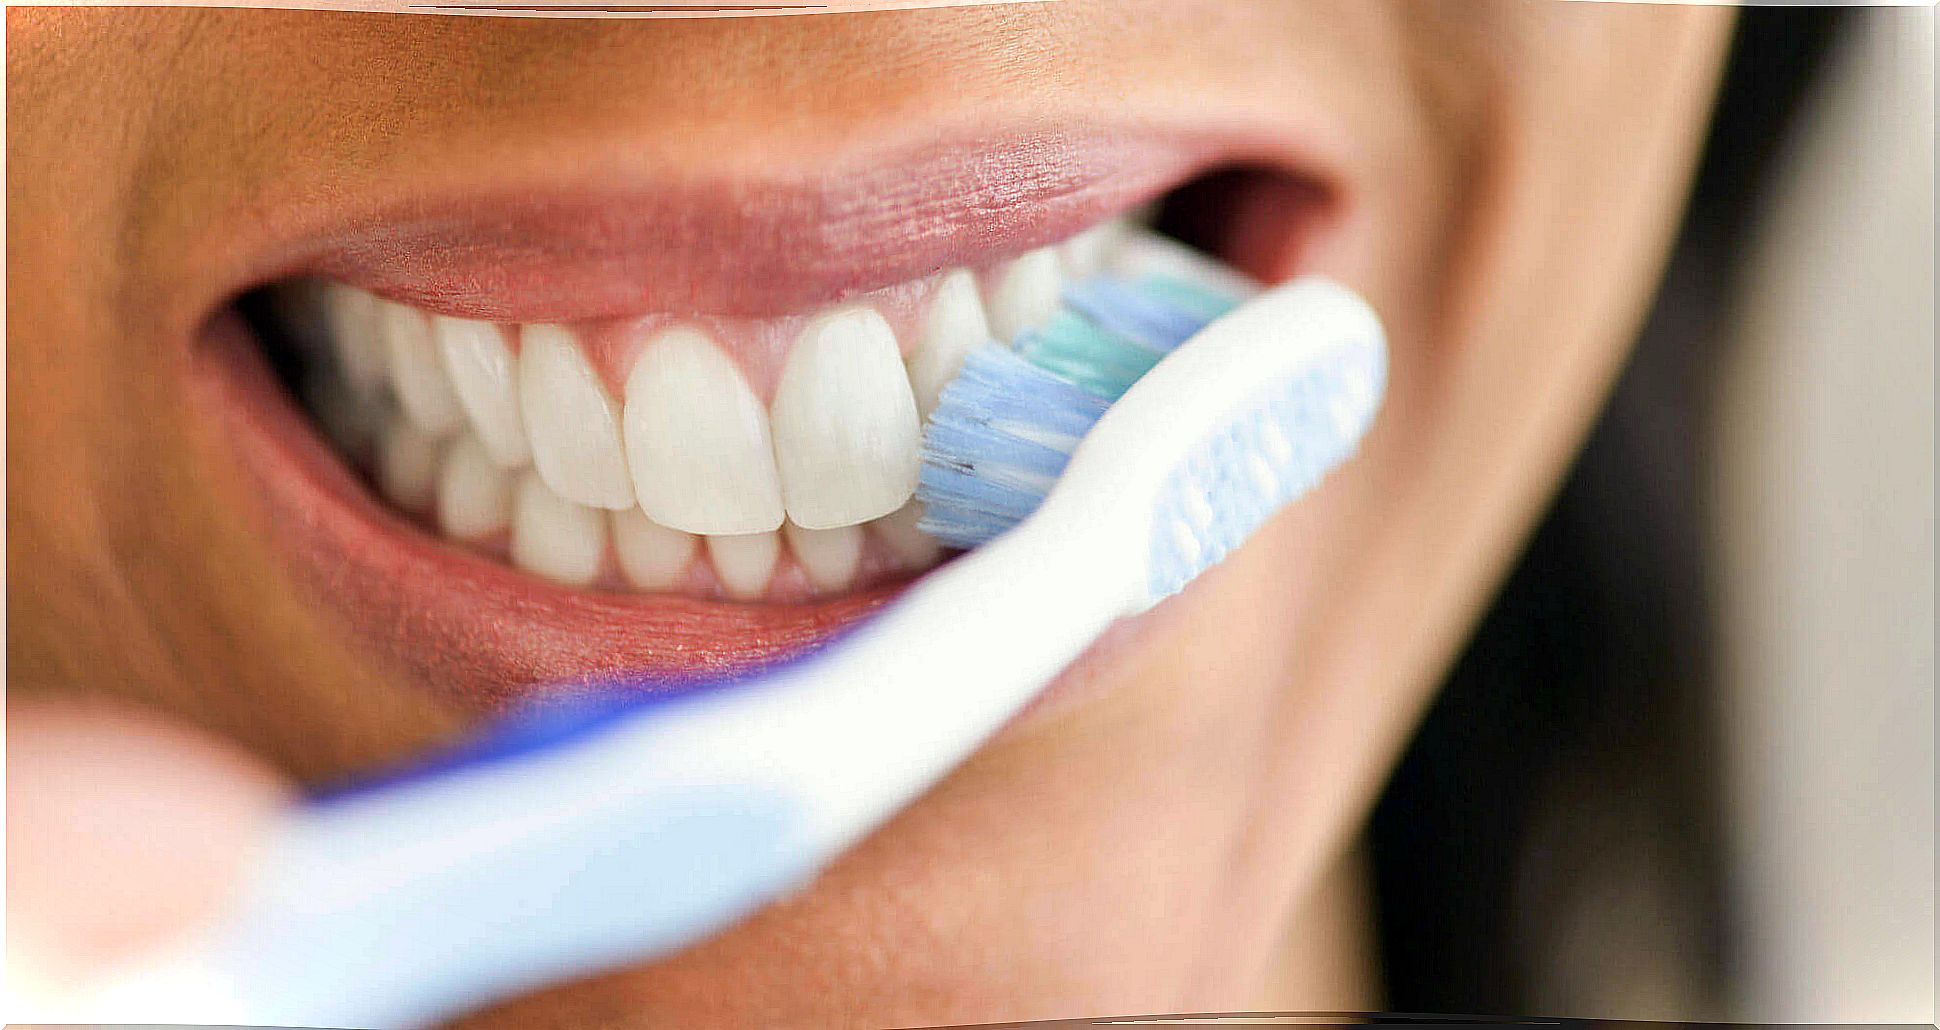 It is best to brush your teeth regularly and properly to prevent bleeding gums